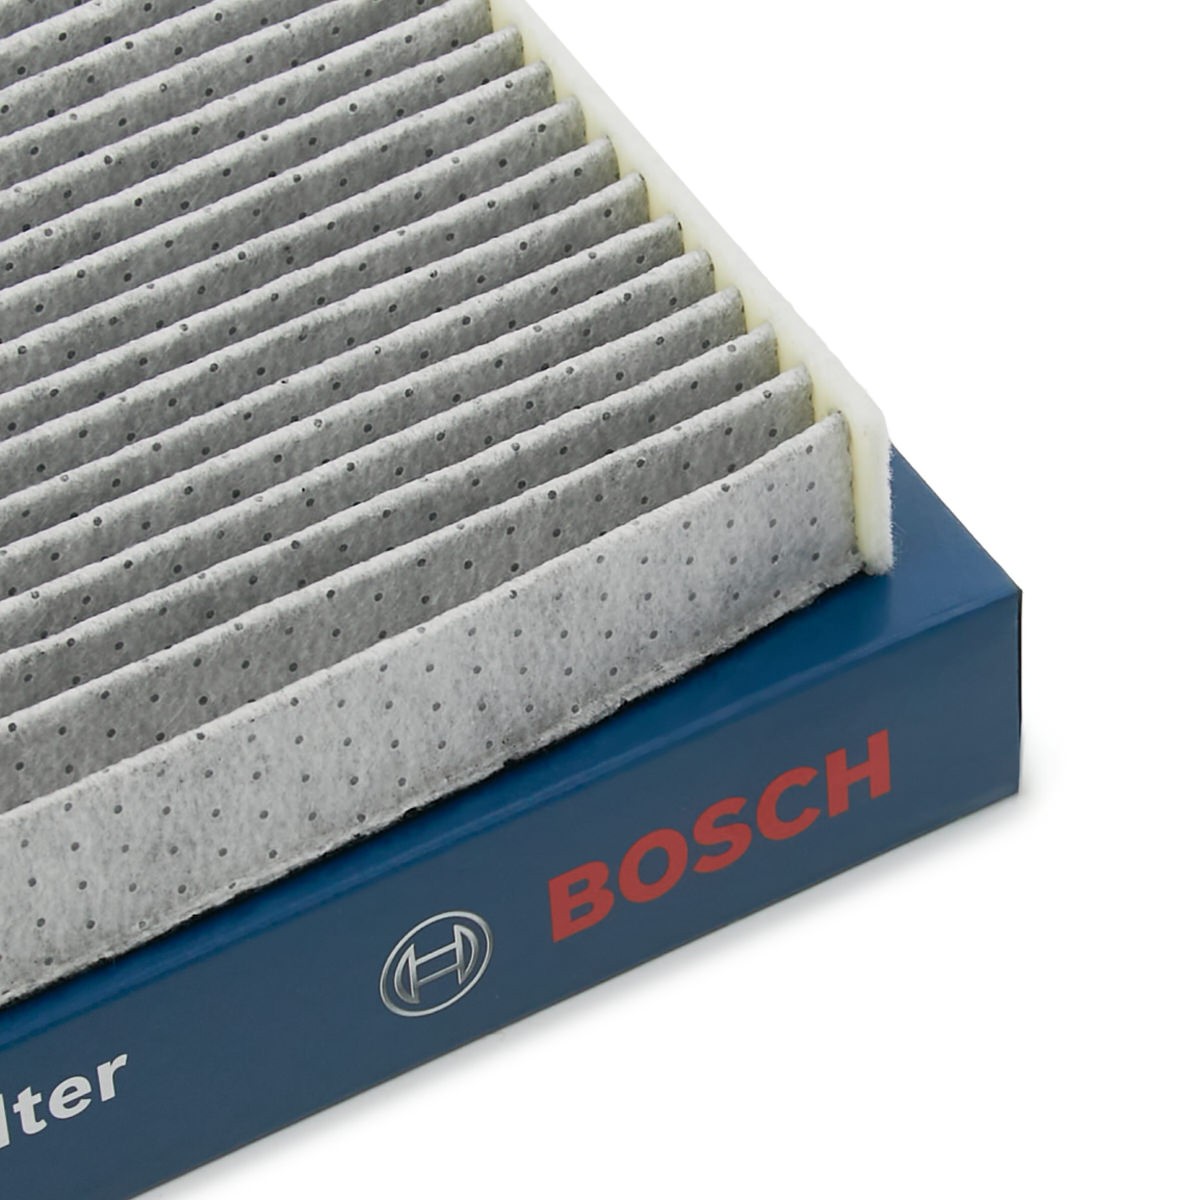 BOSCH 1 987 432 537 Air conditioner filter Activated Carbon Filter, 268 mm x 222 mm x 21 mm